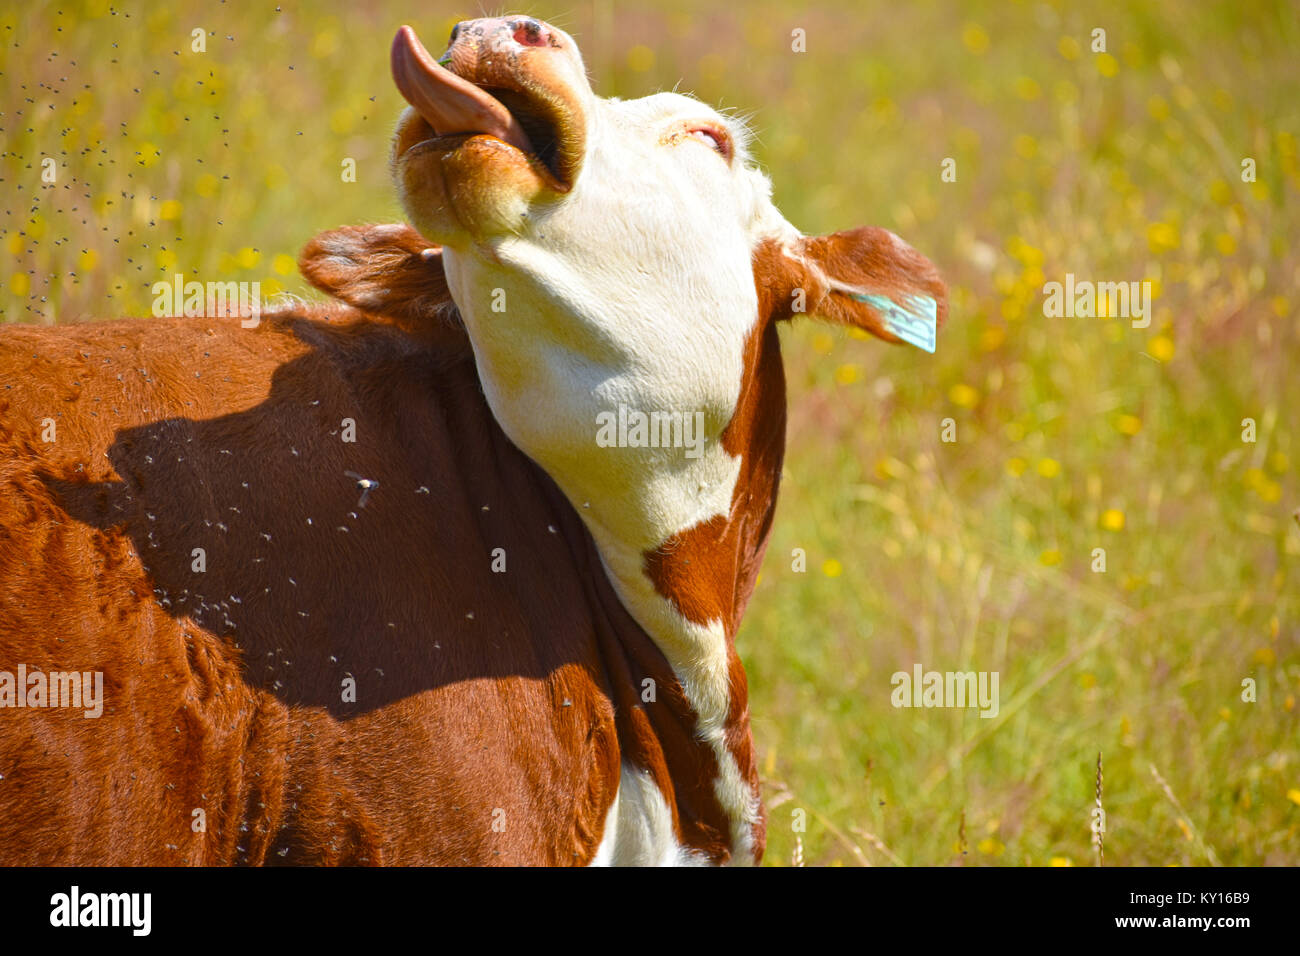 Cow sticking out tongue in a field of dandelion with thousands of flies irritating her.  The humorous cow seems to rolling her eyes. Stock Photo